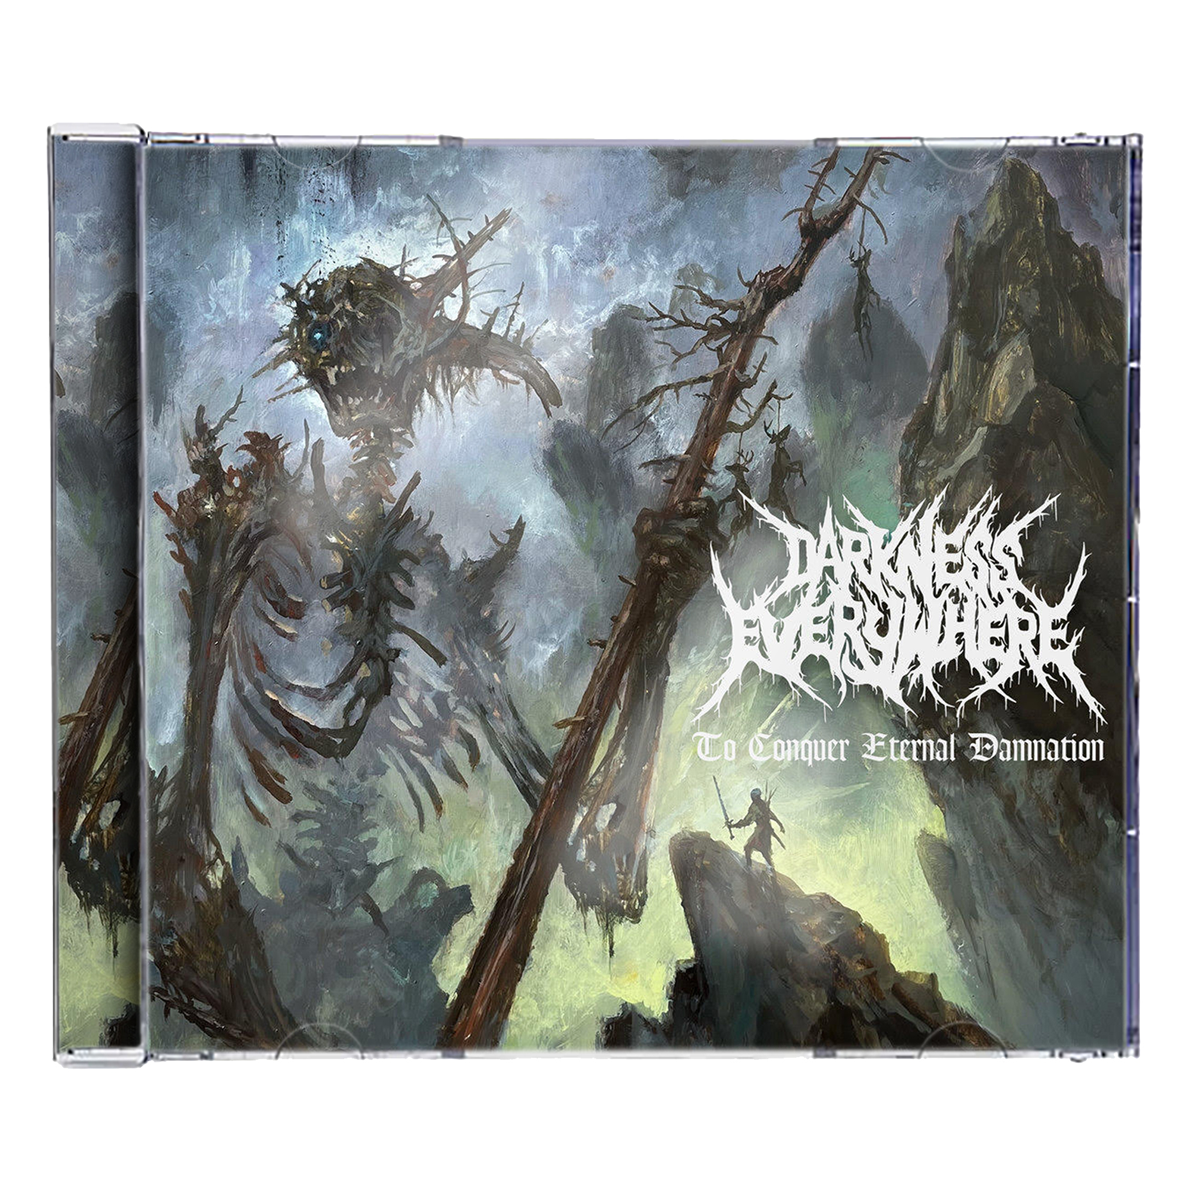 PREORDER: Darkness Everywhere “To Conquer Eternal Damnation” CD